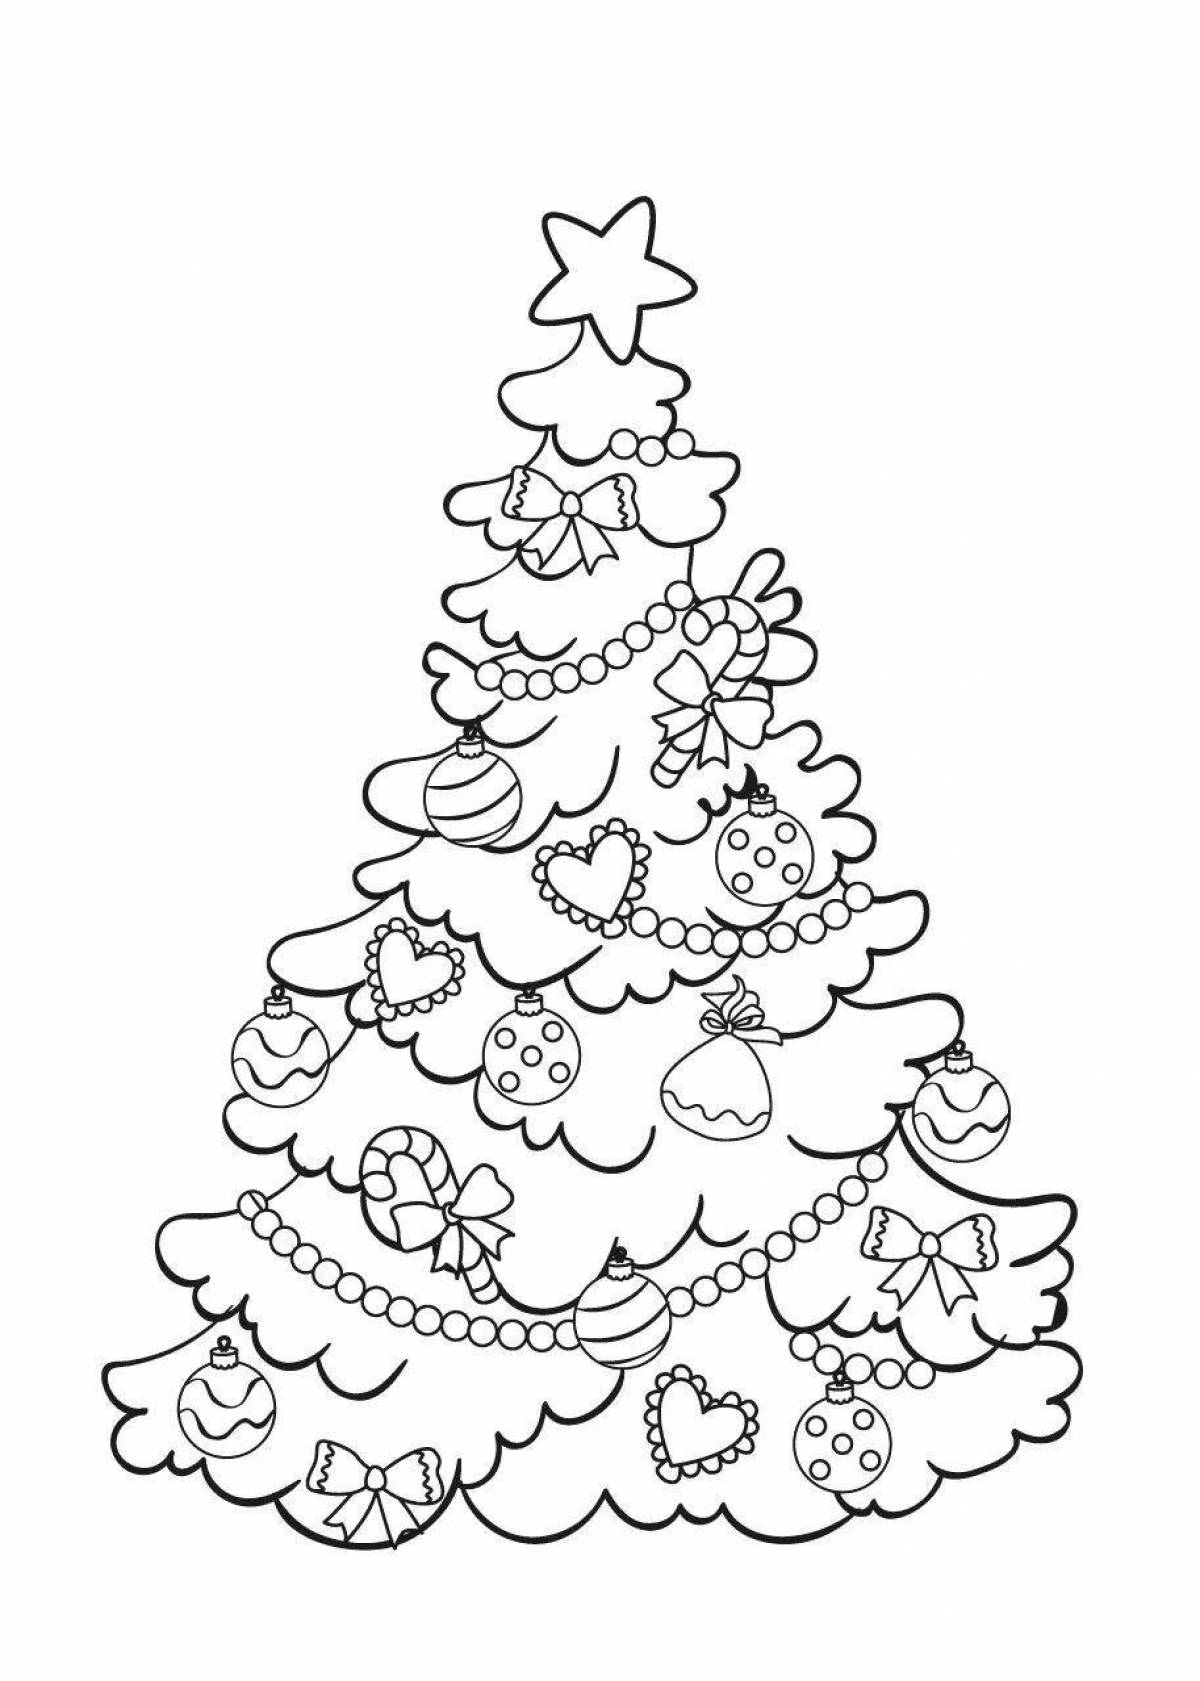 Sparkling Christmas tree coloring book for 6-7 year olds